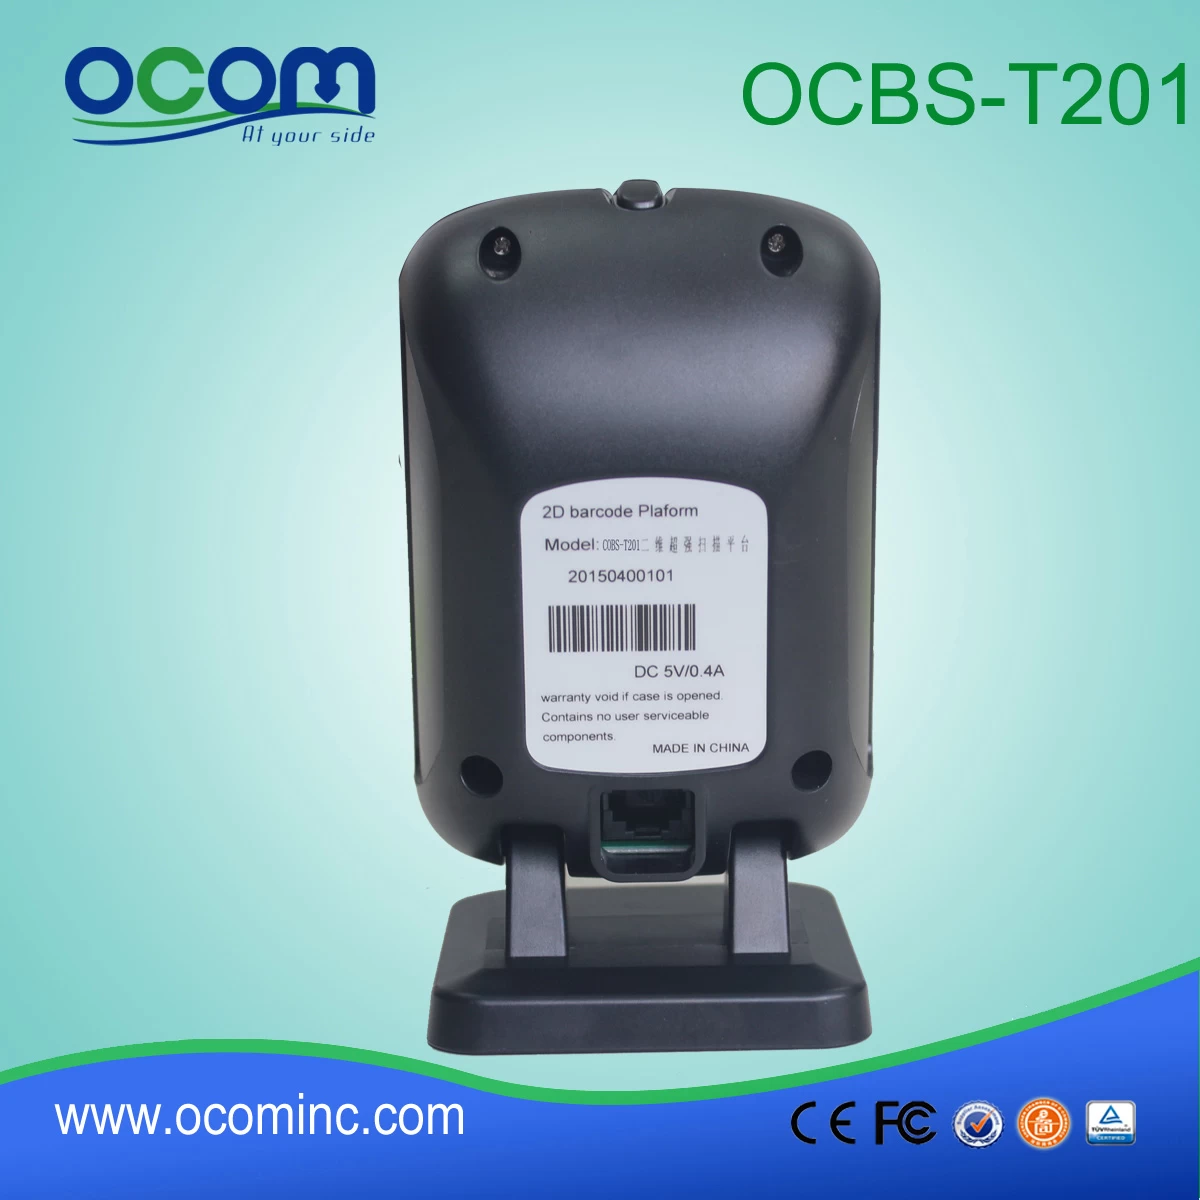 OCBS-T201:flatbed barcode scanner price, china barcode scanner